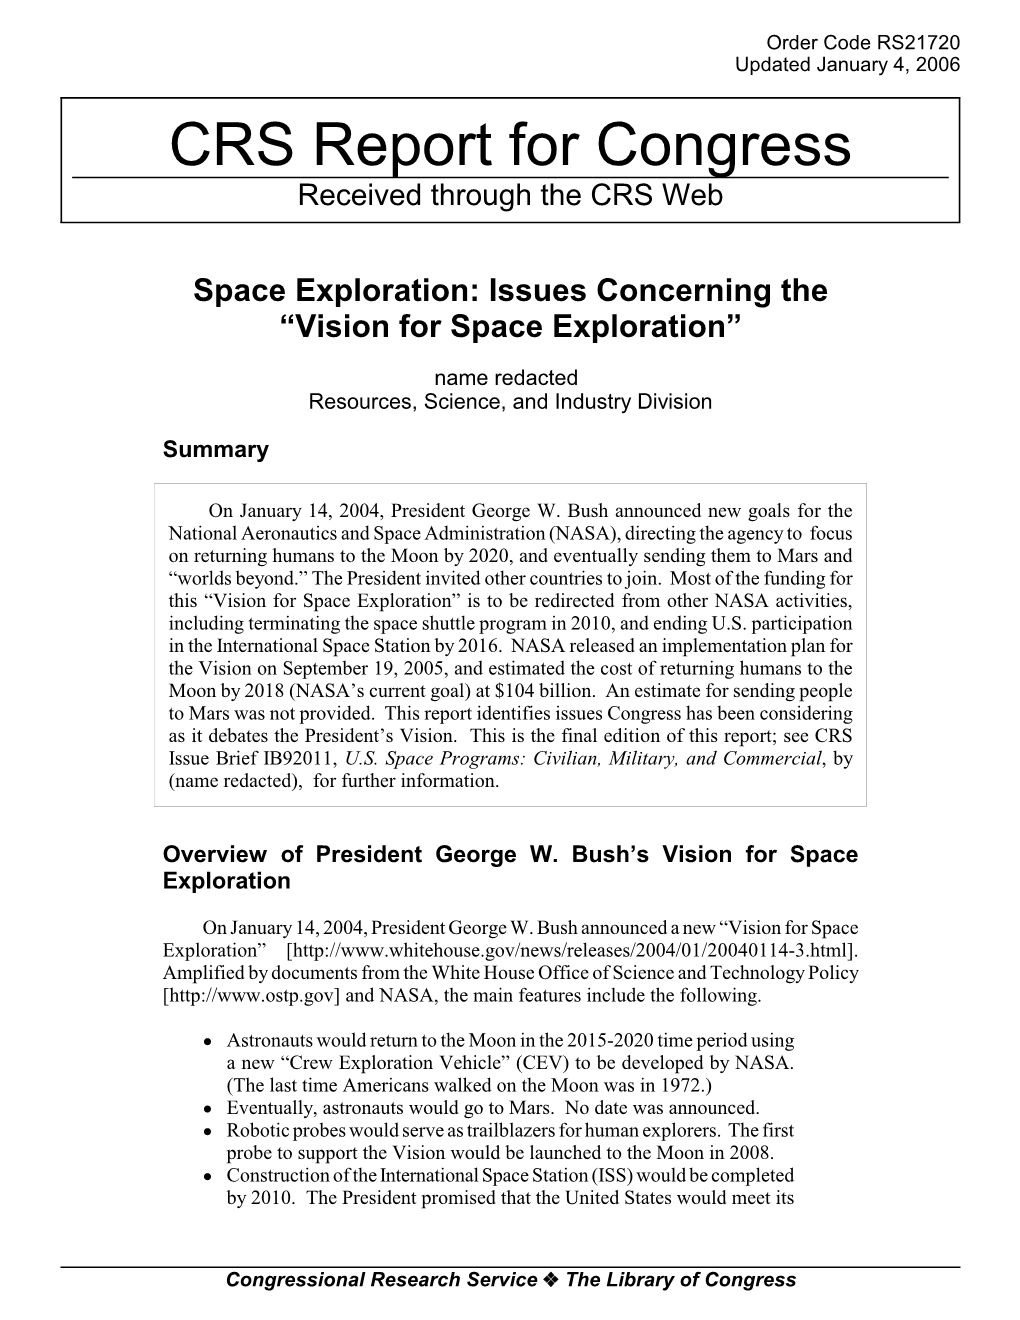 Space Exploration: Issues Concerning the “Vision for Space Exploration”